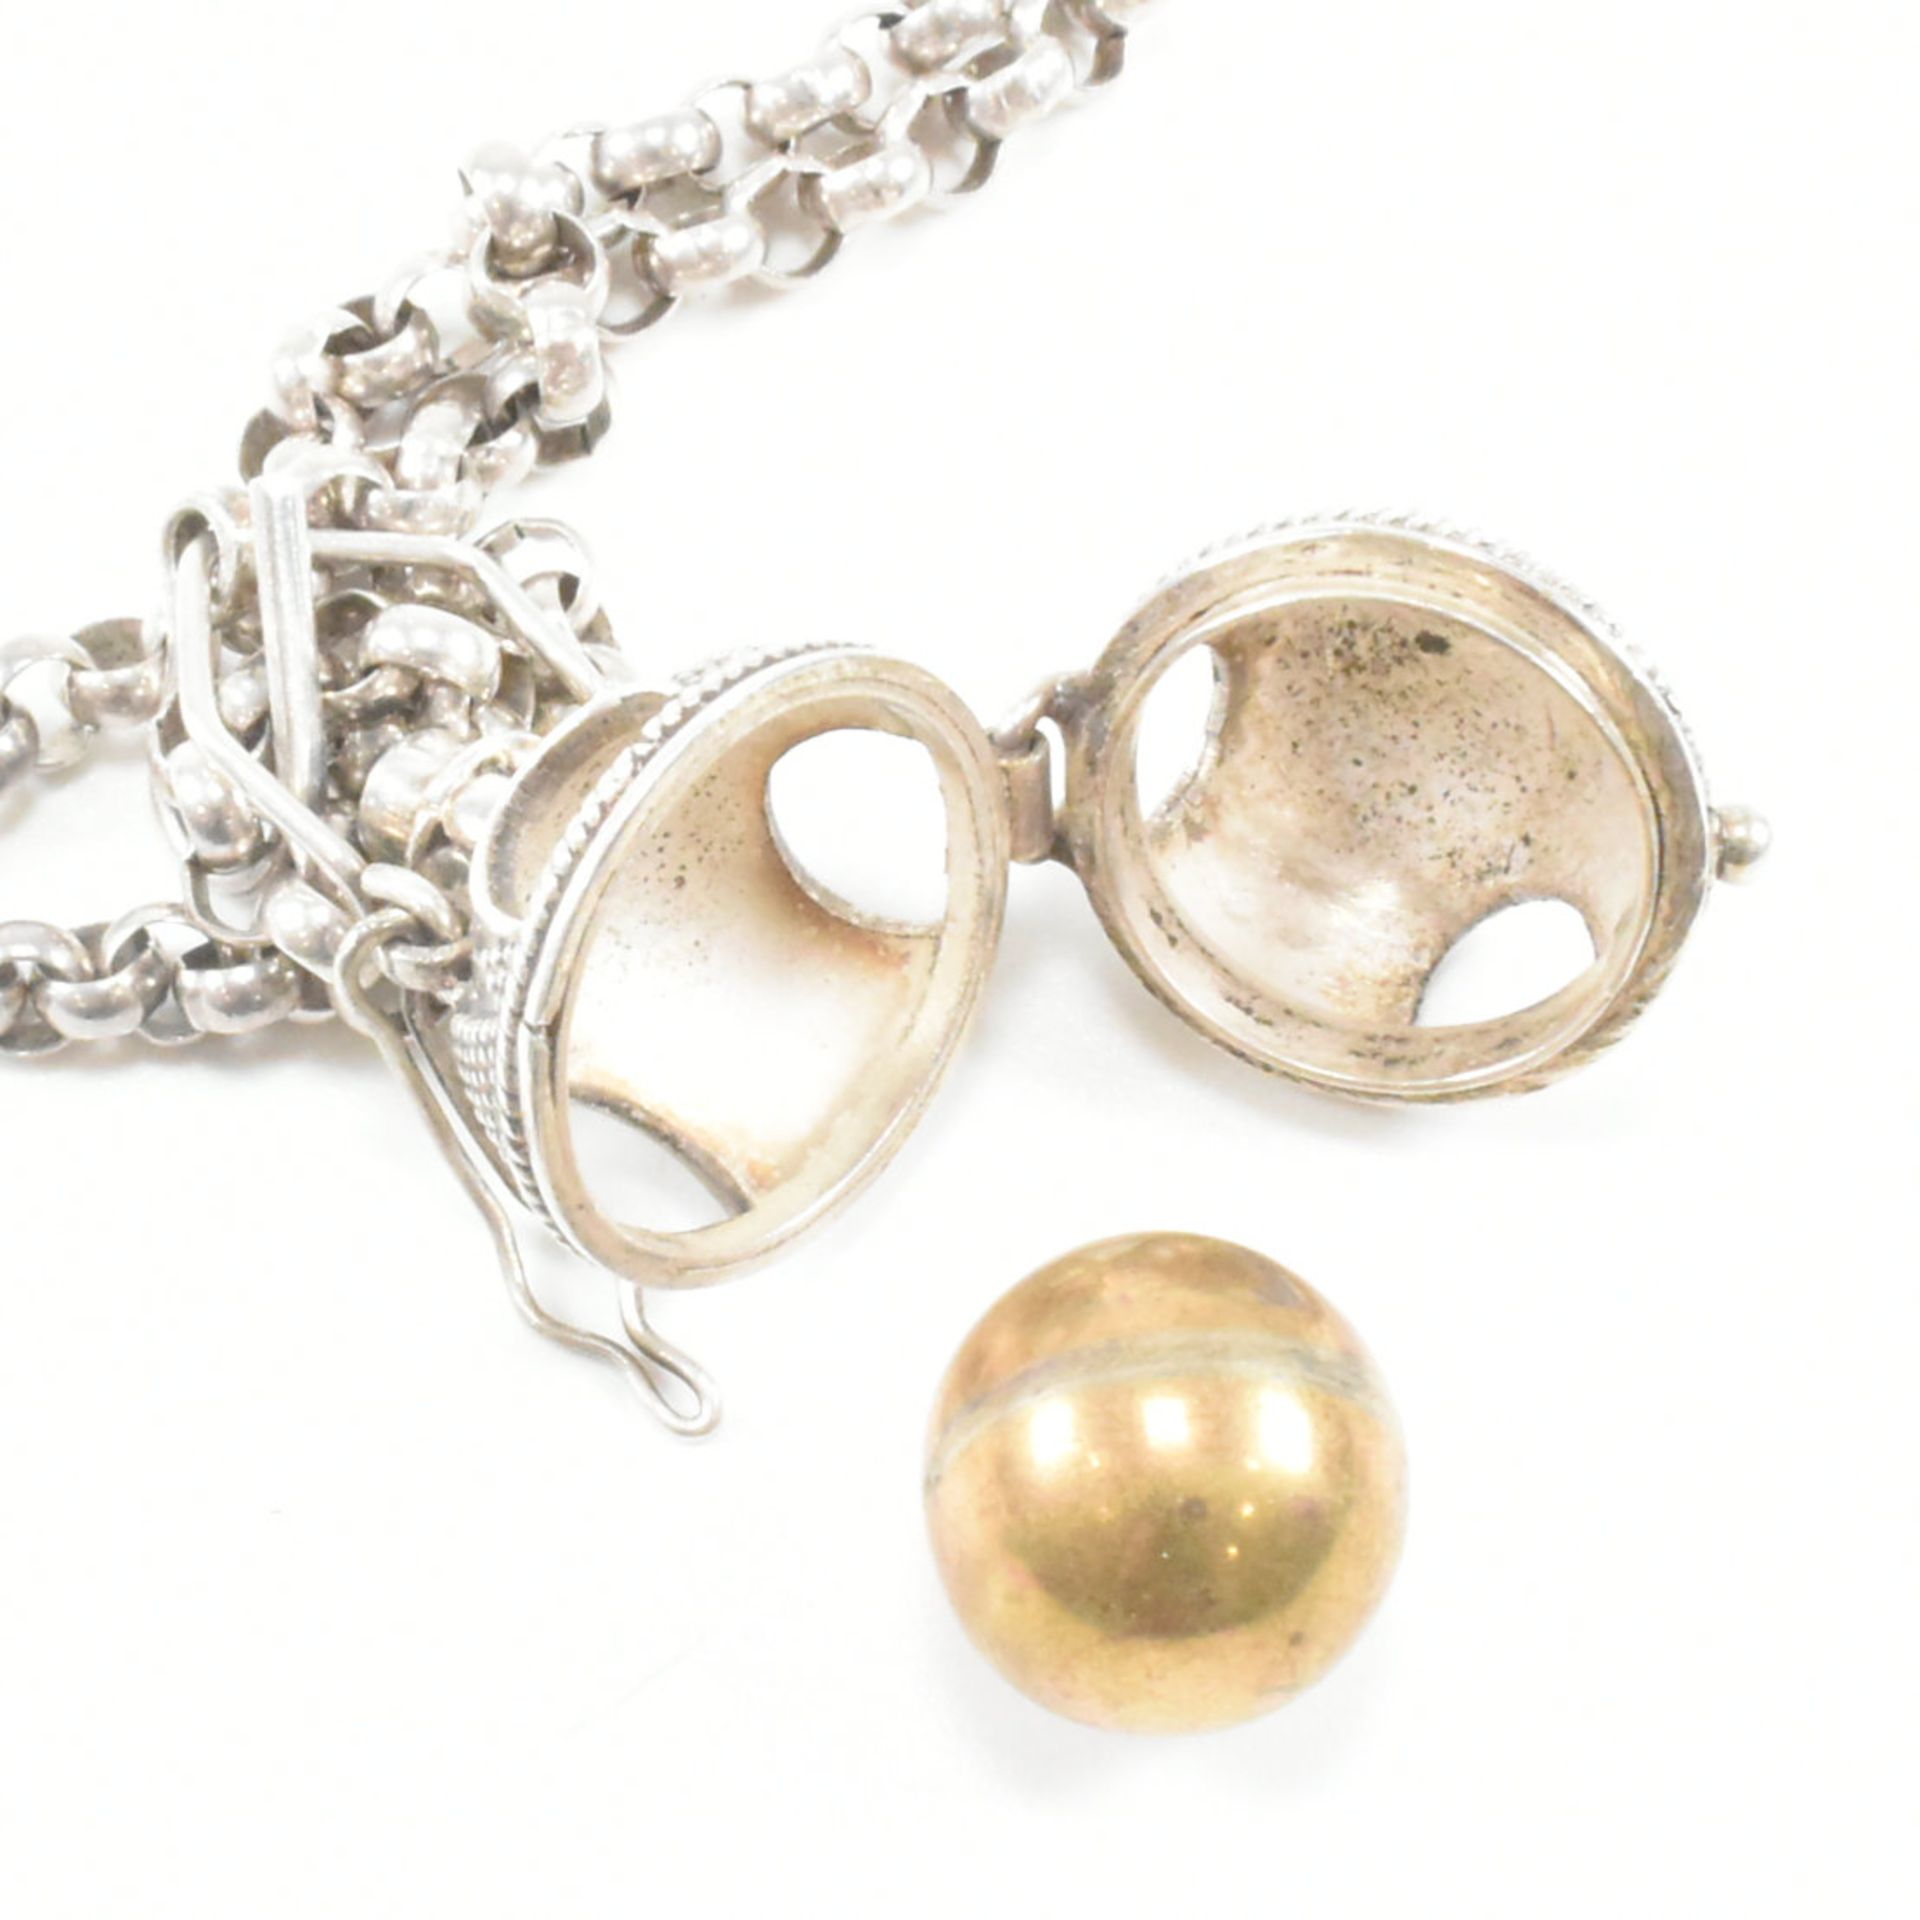 CONTEMPORARY WHITE METAL BELCHER CHAIN & BOLA HARMONY PENDANT - Image 11 of 16